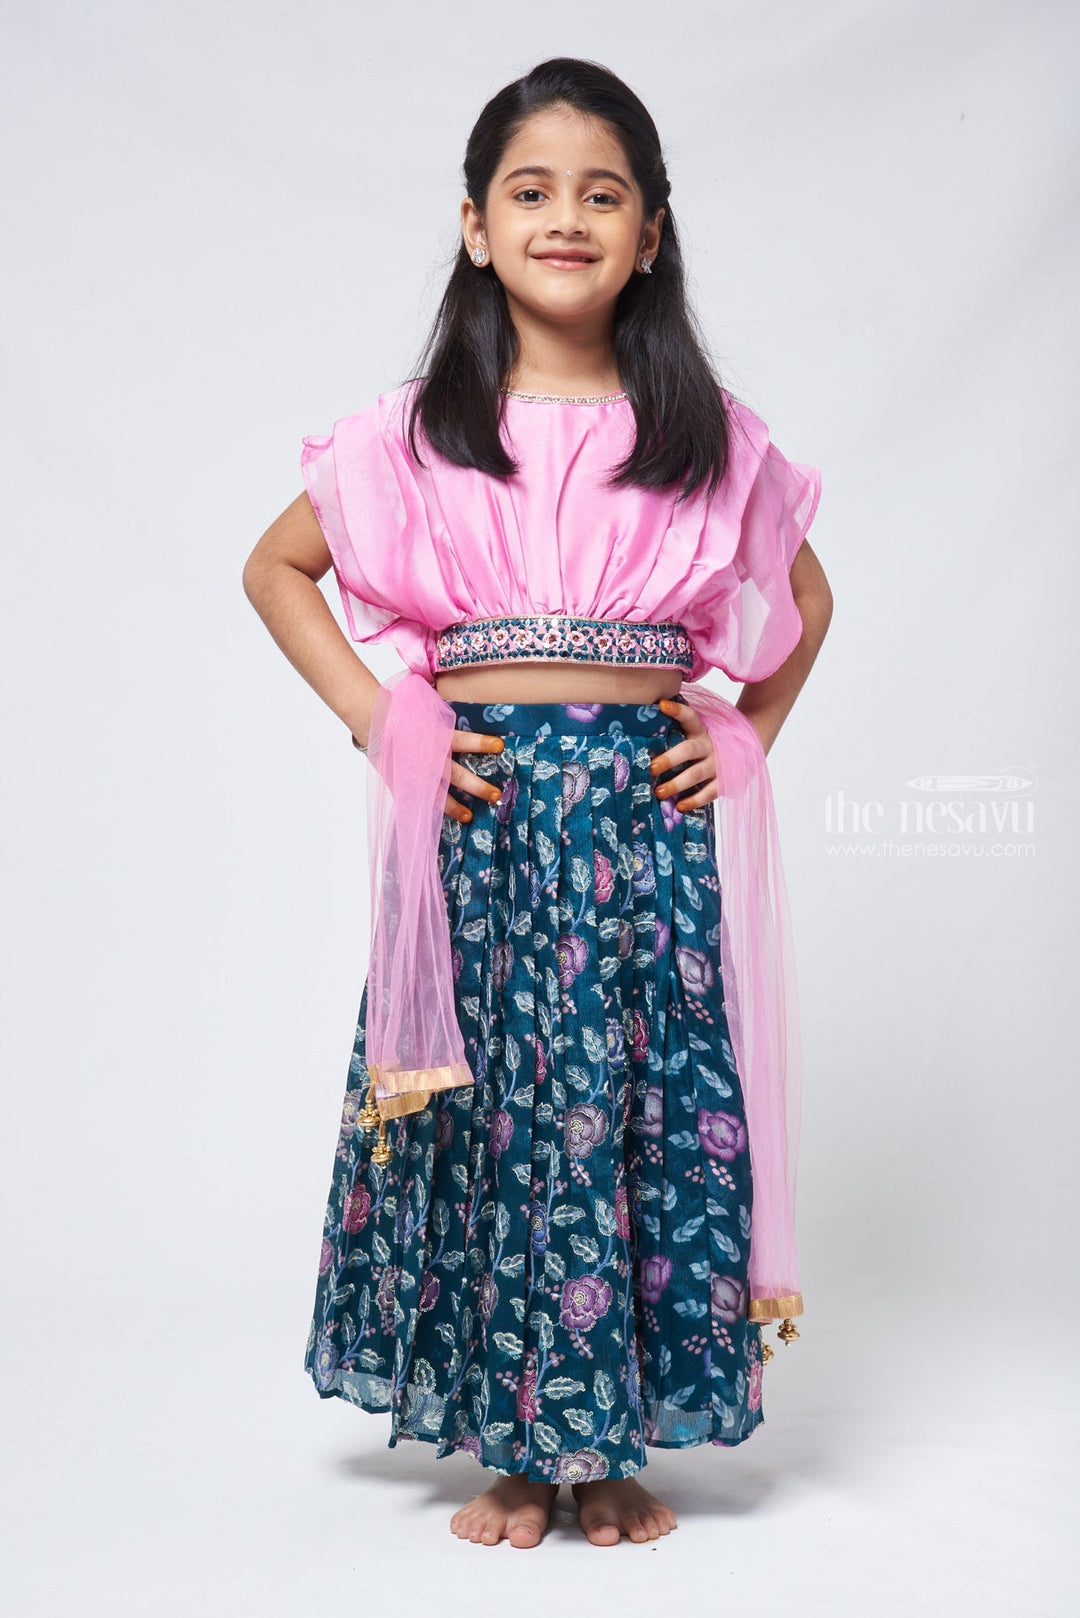 The Nesavu Lehenga & Ghagra Blossom Green: Girls Floral Lehanga Choli with Pleated Pink Blouse Nesavu 16 (1Y) / Green GL351A-16 Enhance your little girls charm with this captivating Floral Printed Knife Pleated Designer Green Lehenga Choli set. The green lehenga showcases a stunning floral print and knife pleats, exuding sophistication and beauty in her outfit.